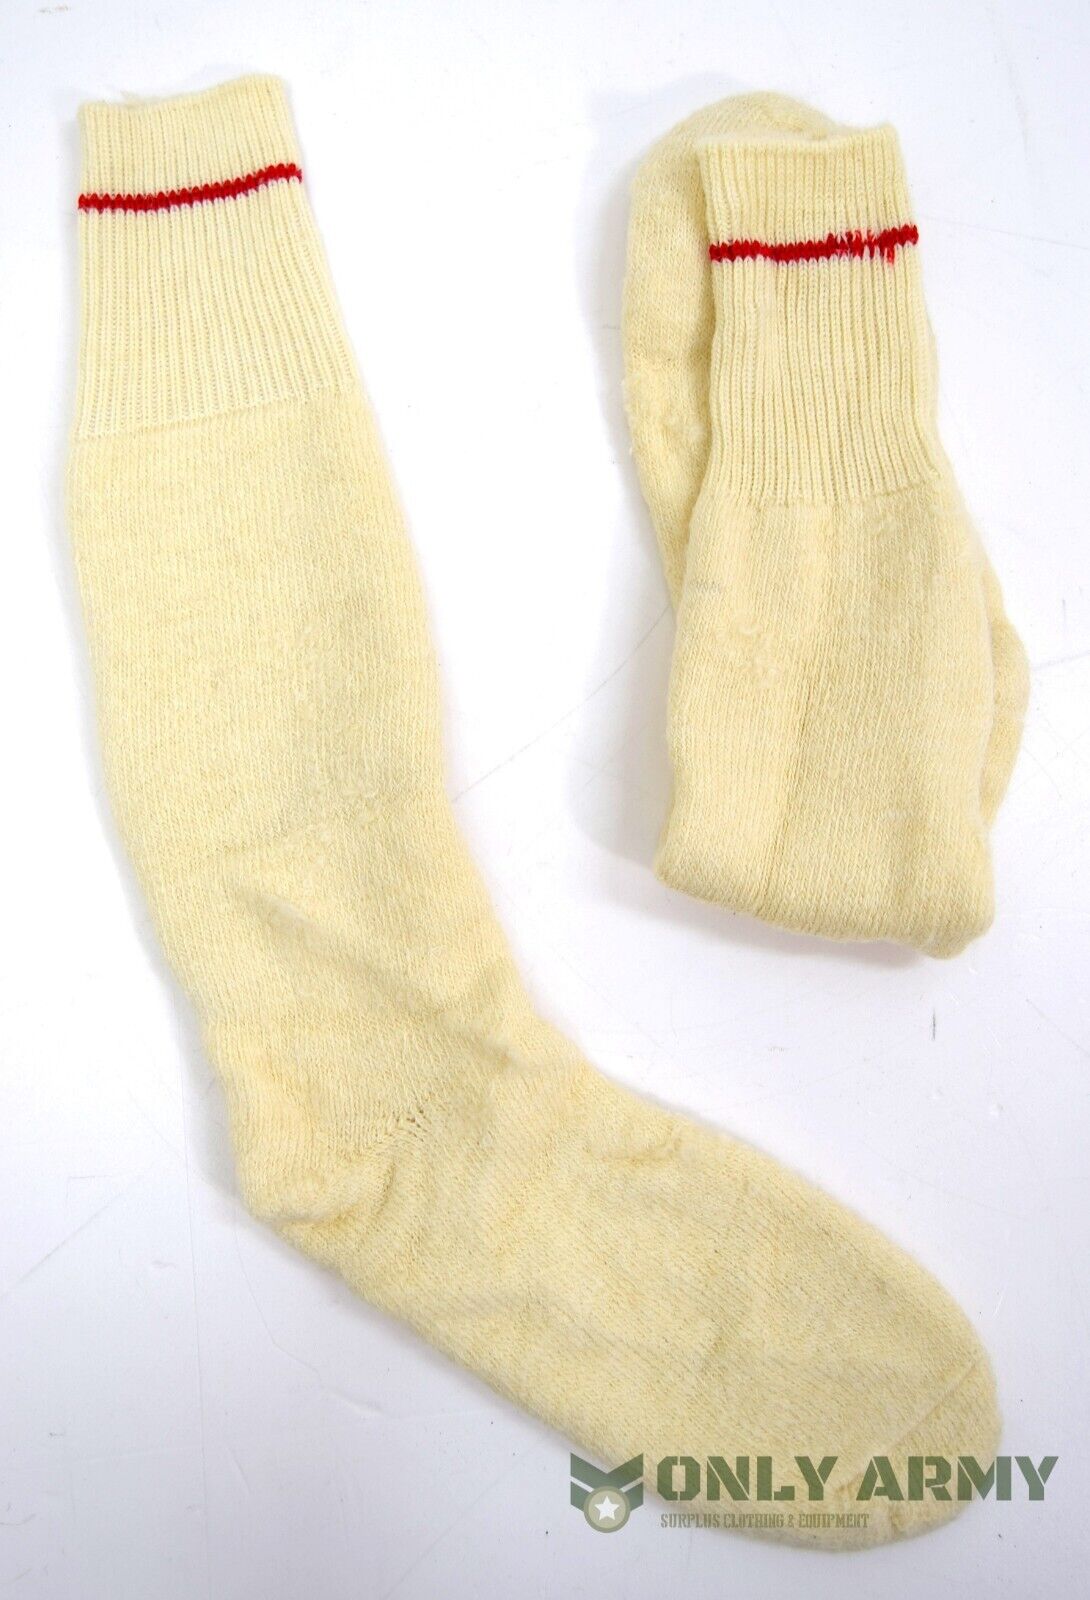 British Army Issue Arctic Socks Issued Grade 1 Military Wool Sock Cold Weather